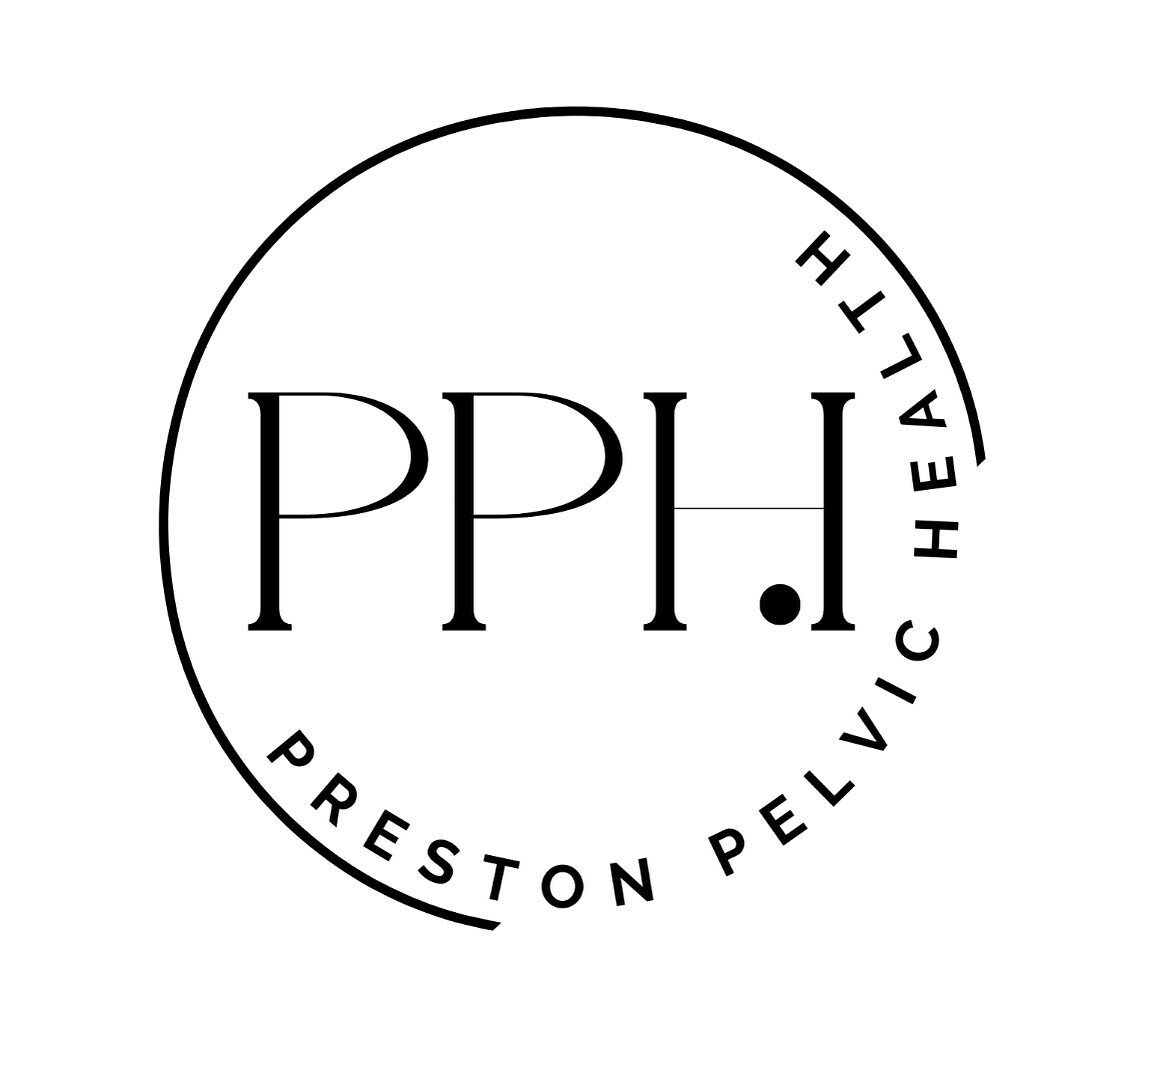 Preston Pelvic Health is now its own individual company! Stay tuned for more updates.